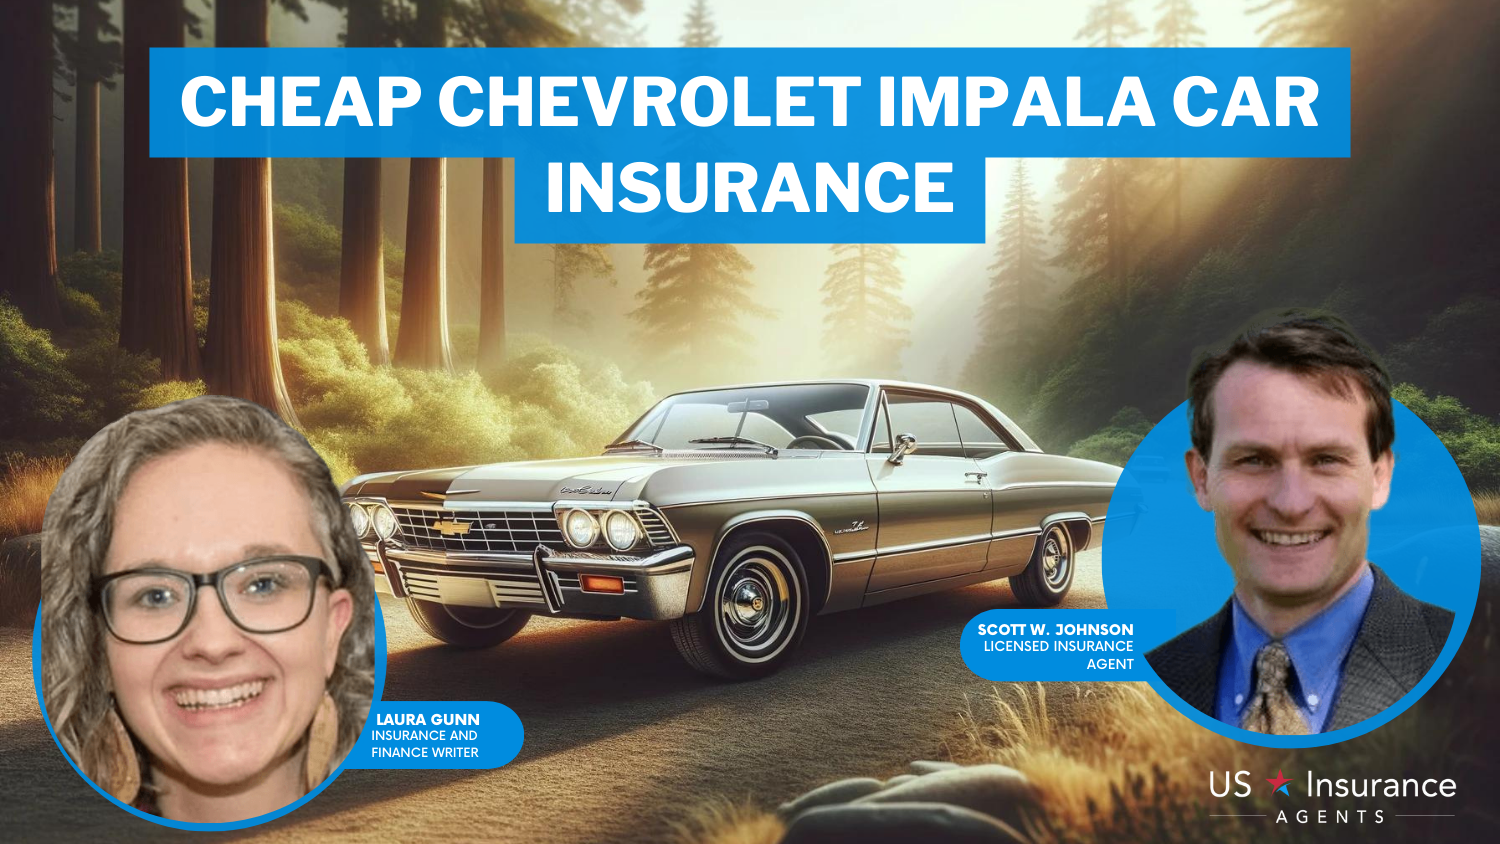 Cheap Chevrolet Impala Car Insurance: State Farm, Auto-Owners, and Mercury